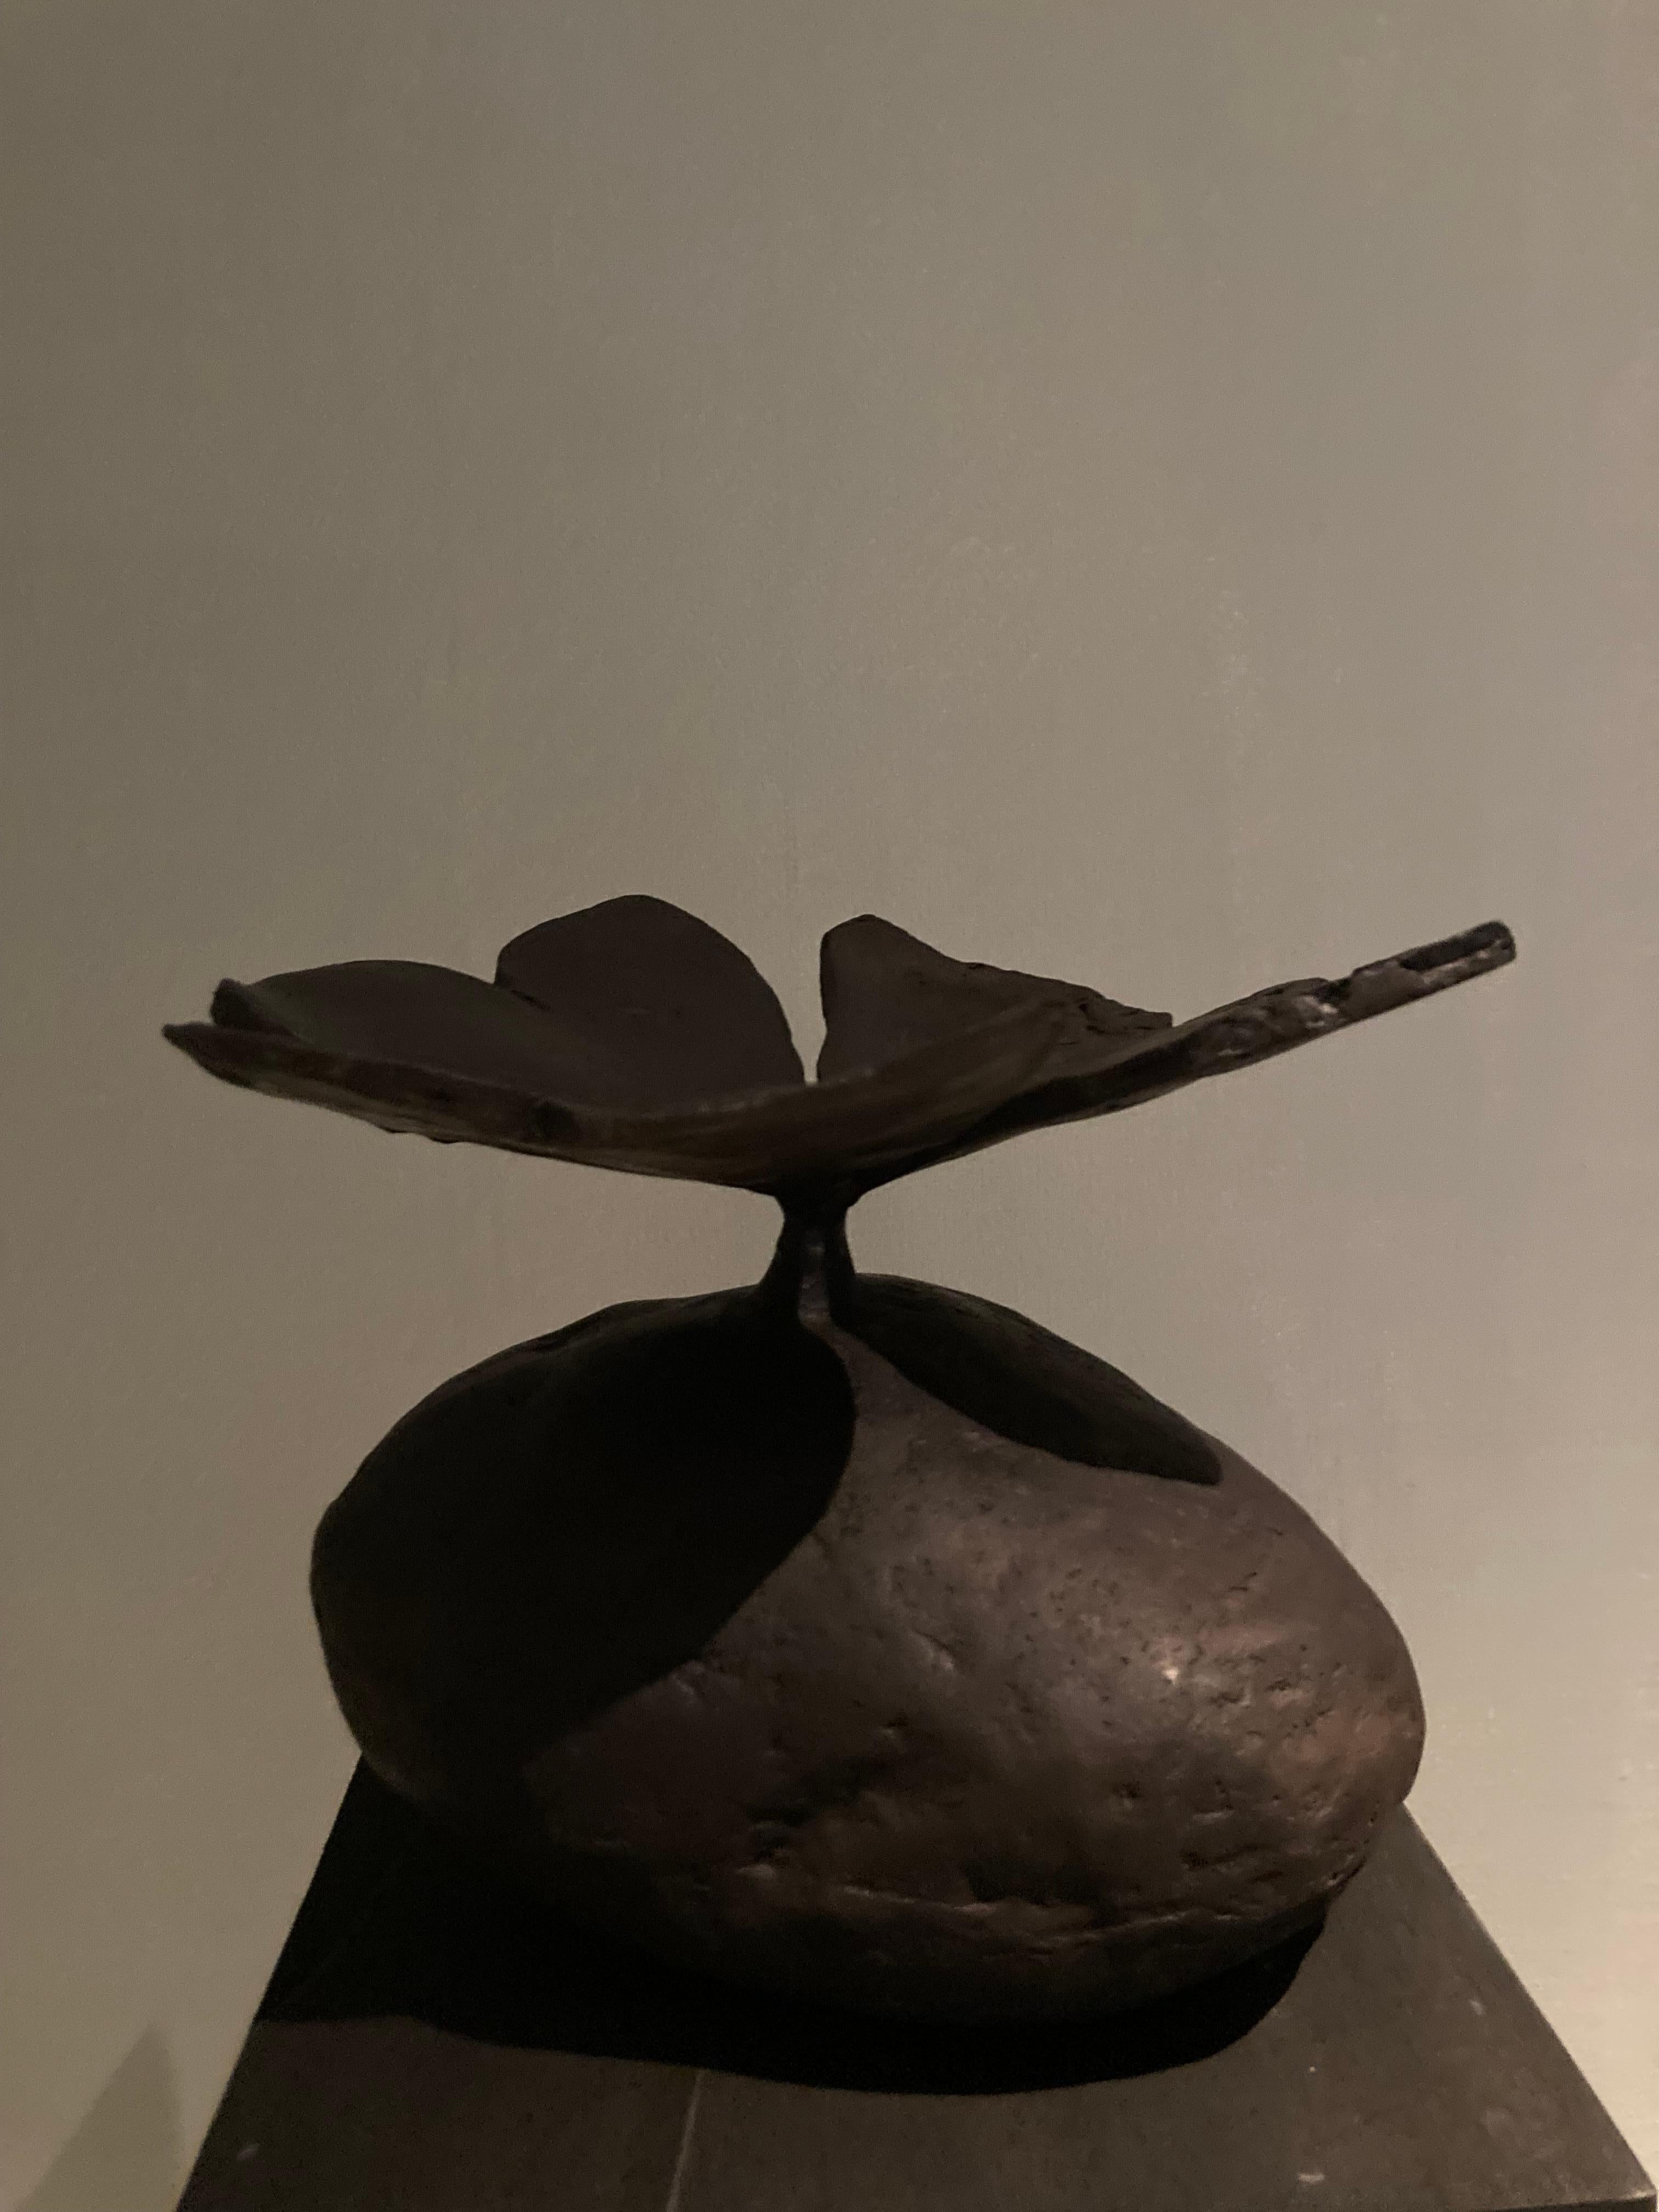 Bronze Patinated Oxalis Decorative Object by Herma de Wit
Limited Edition of 6 + 2 AP pieces.
Dimensions: D 21 x W 21 x H 17 cm. 
Materials: Patinated bronze.

Nature, a boundless source of inspiration and pure beauty. Those who are not touched by